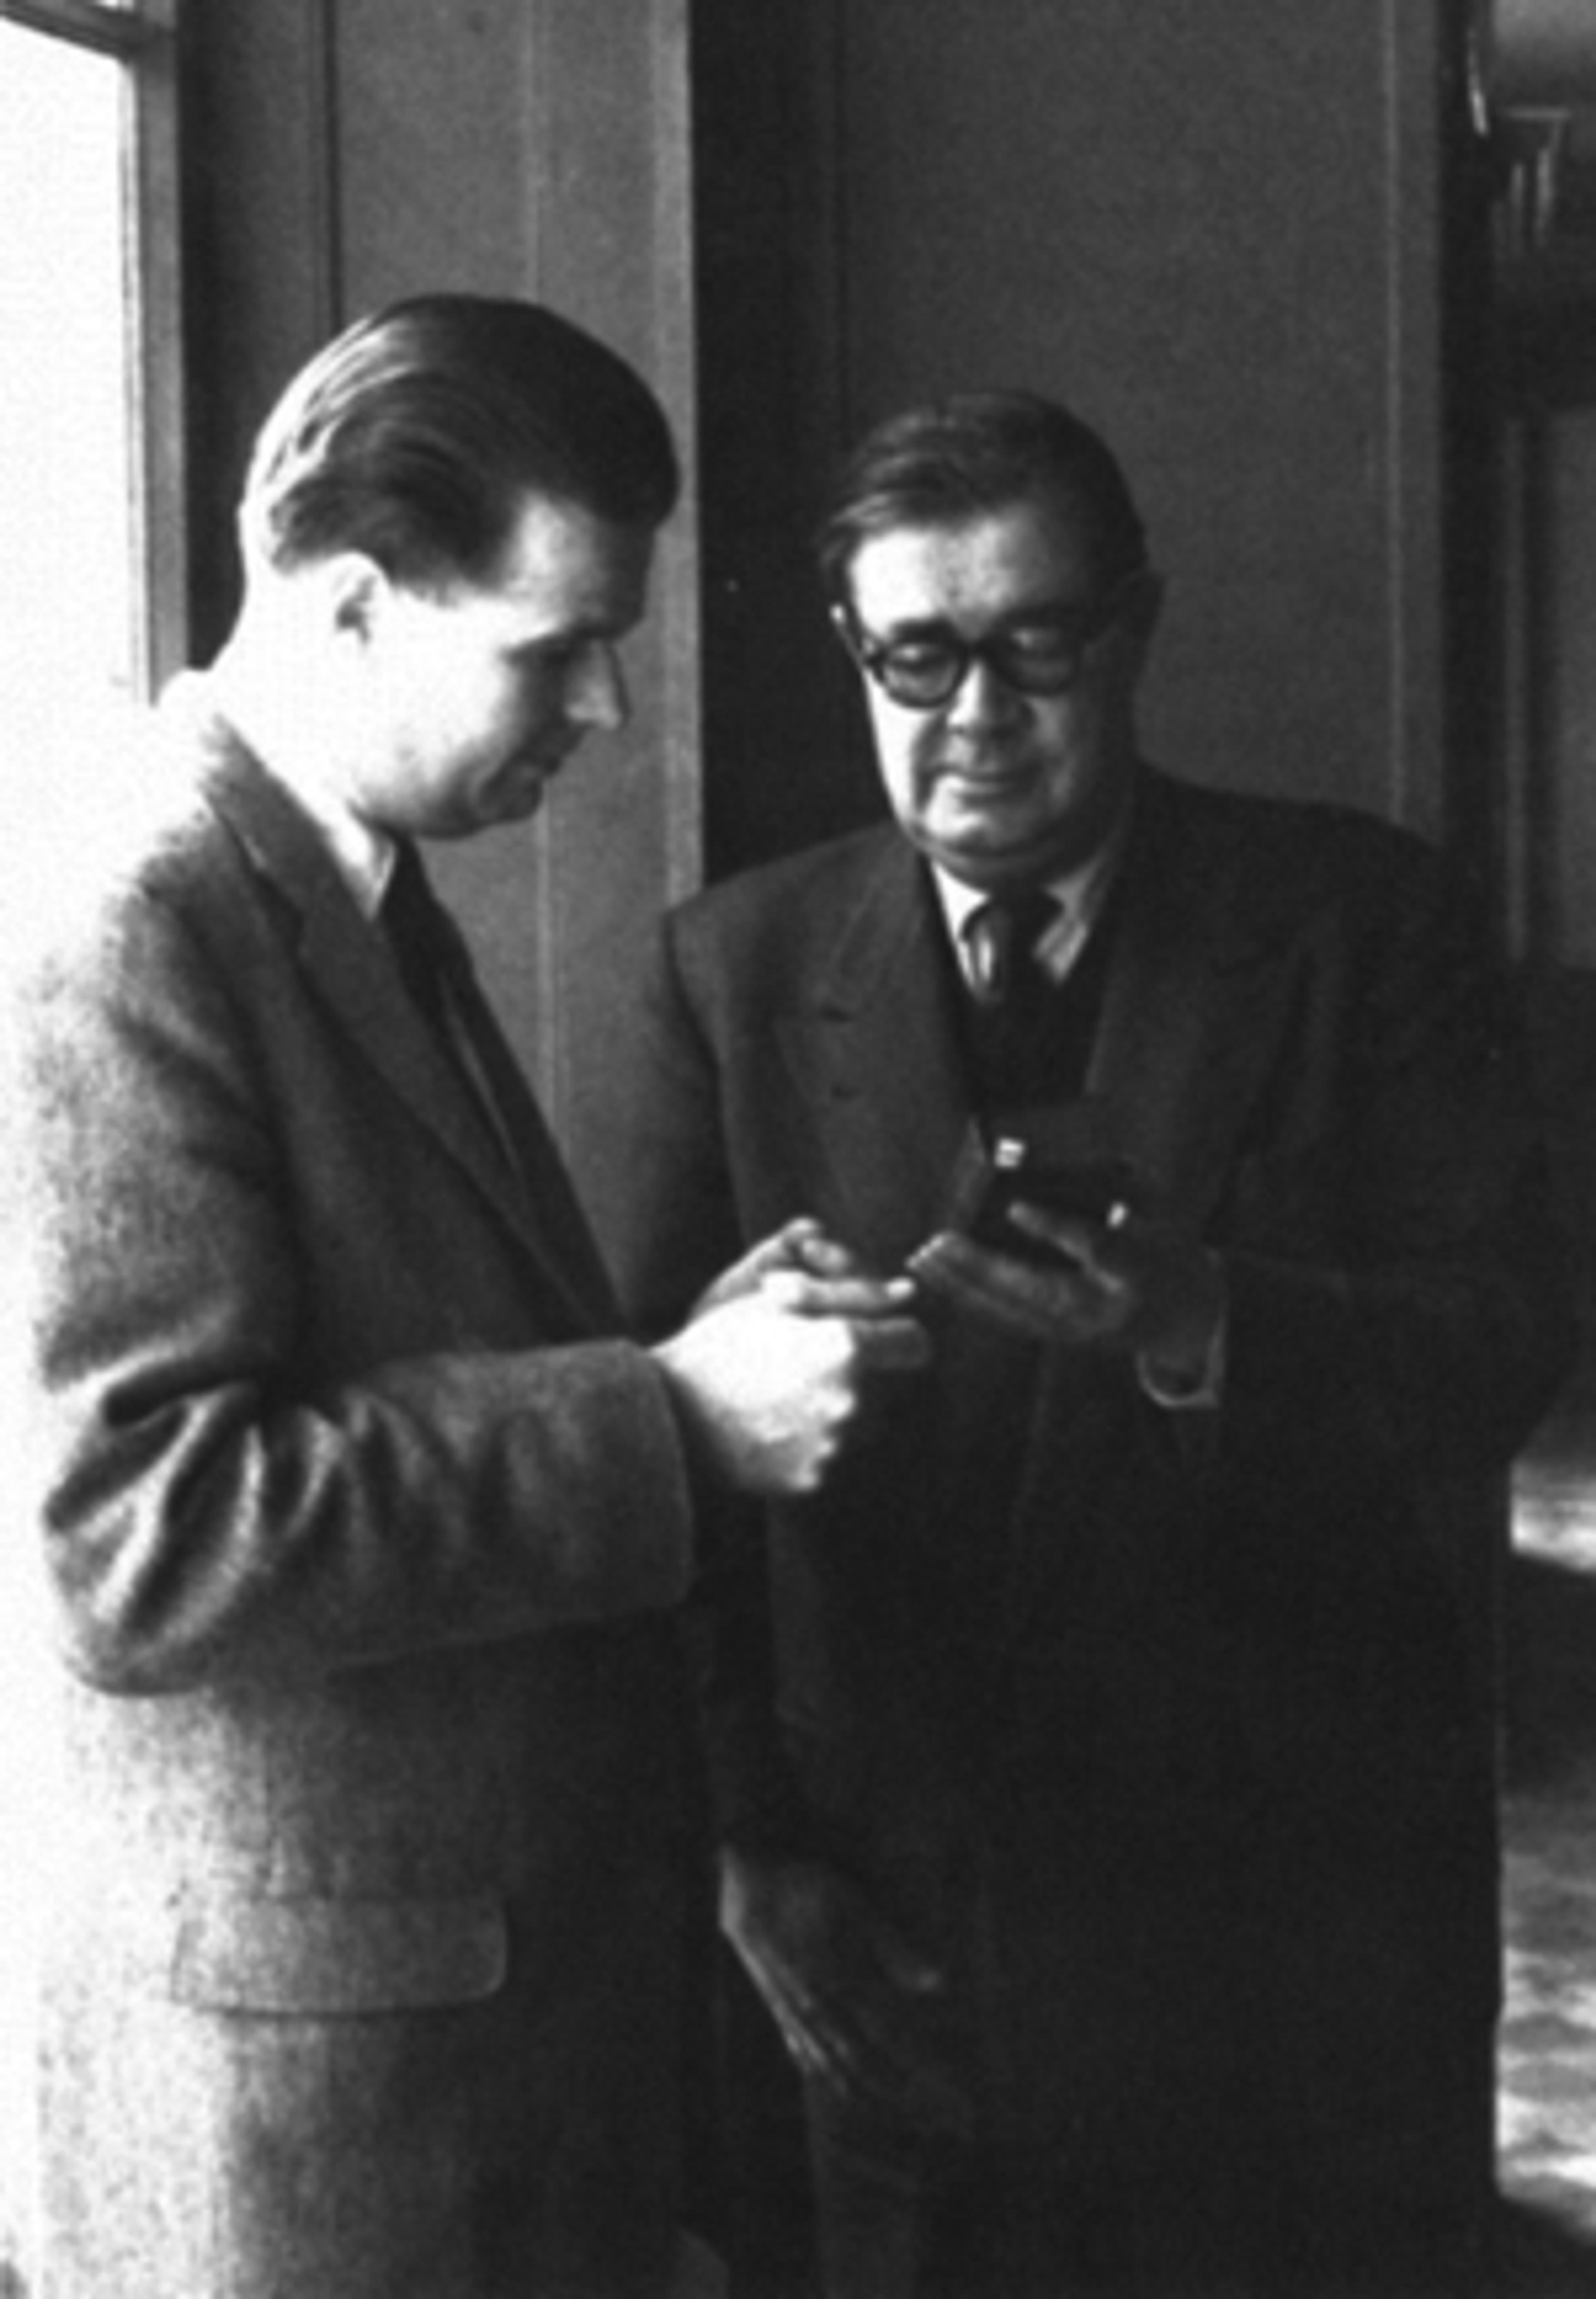 Right: Laurence Witten (left) and fellow antiquarian book dealer Nicholas Rauch